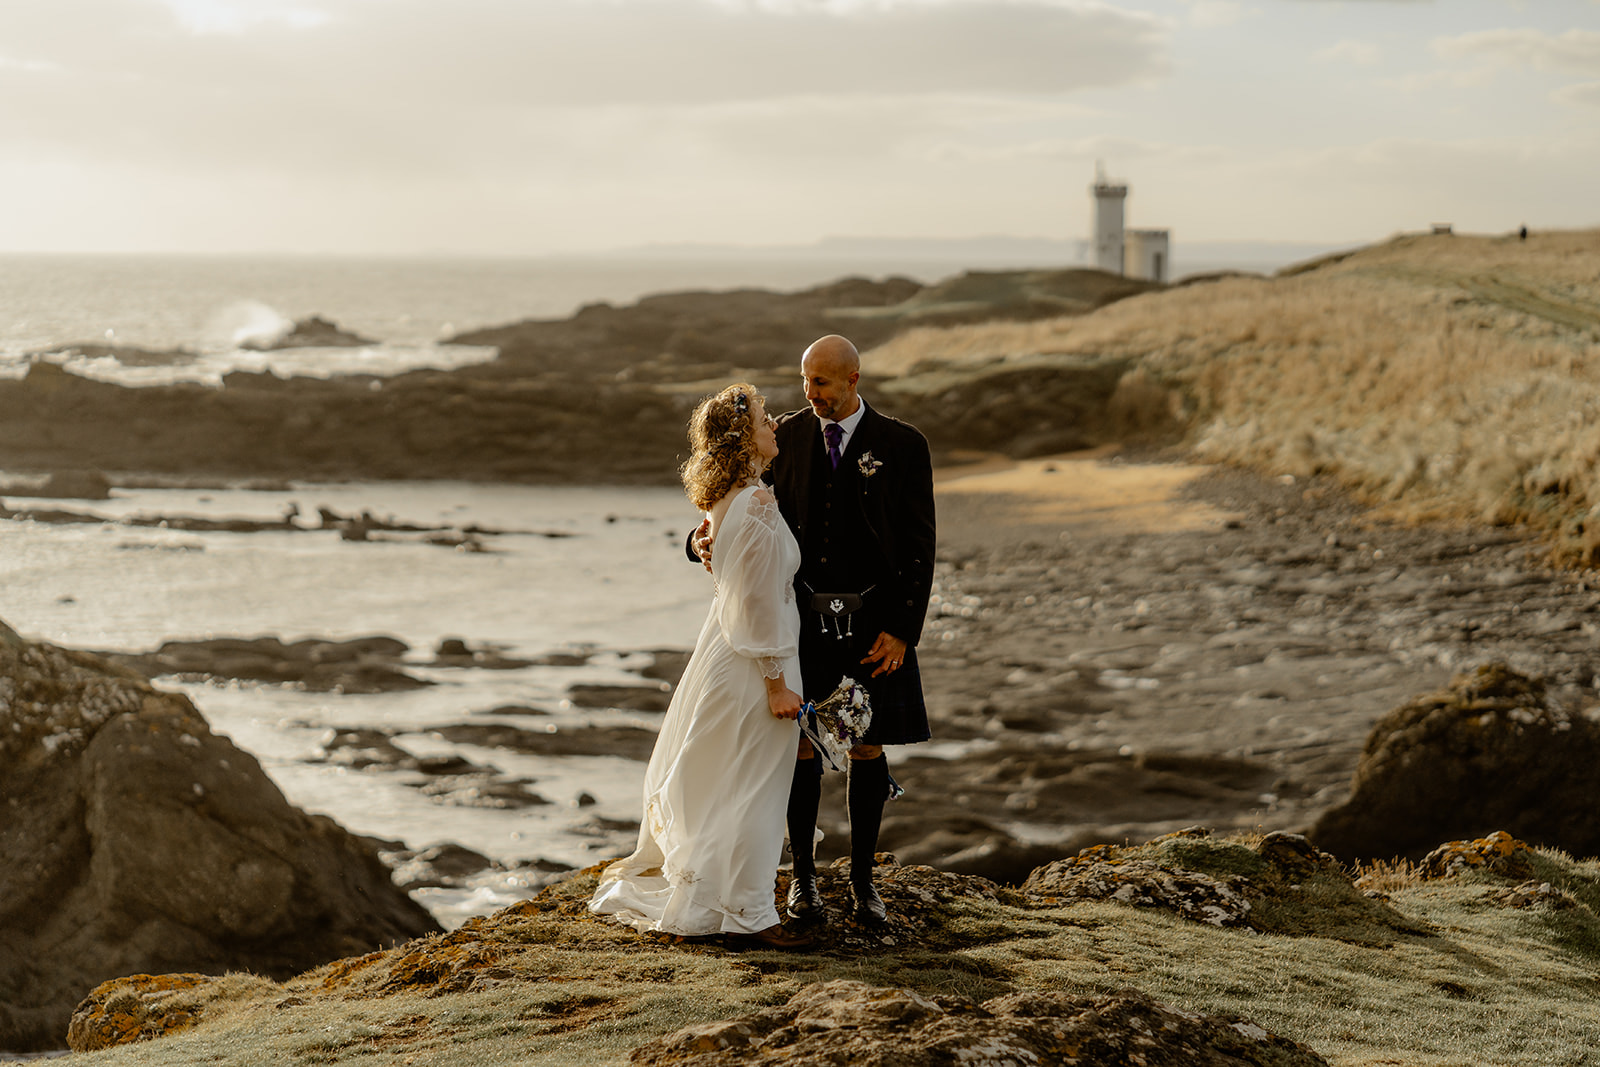 French couple elope at Lady's Tower in Scotland